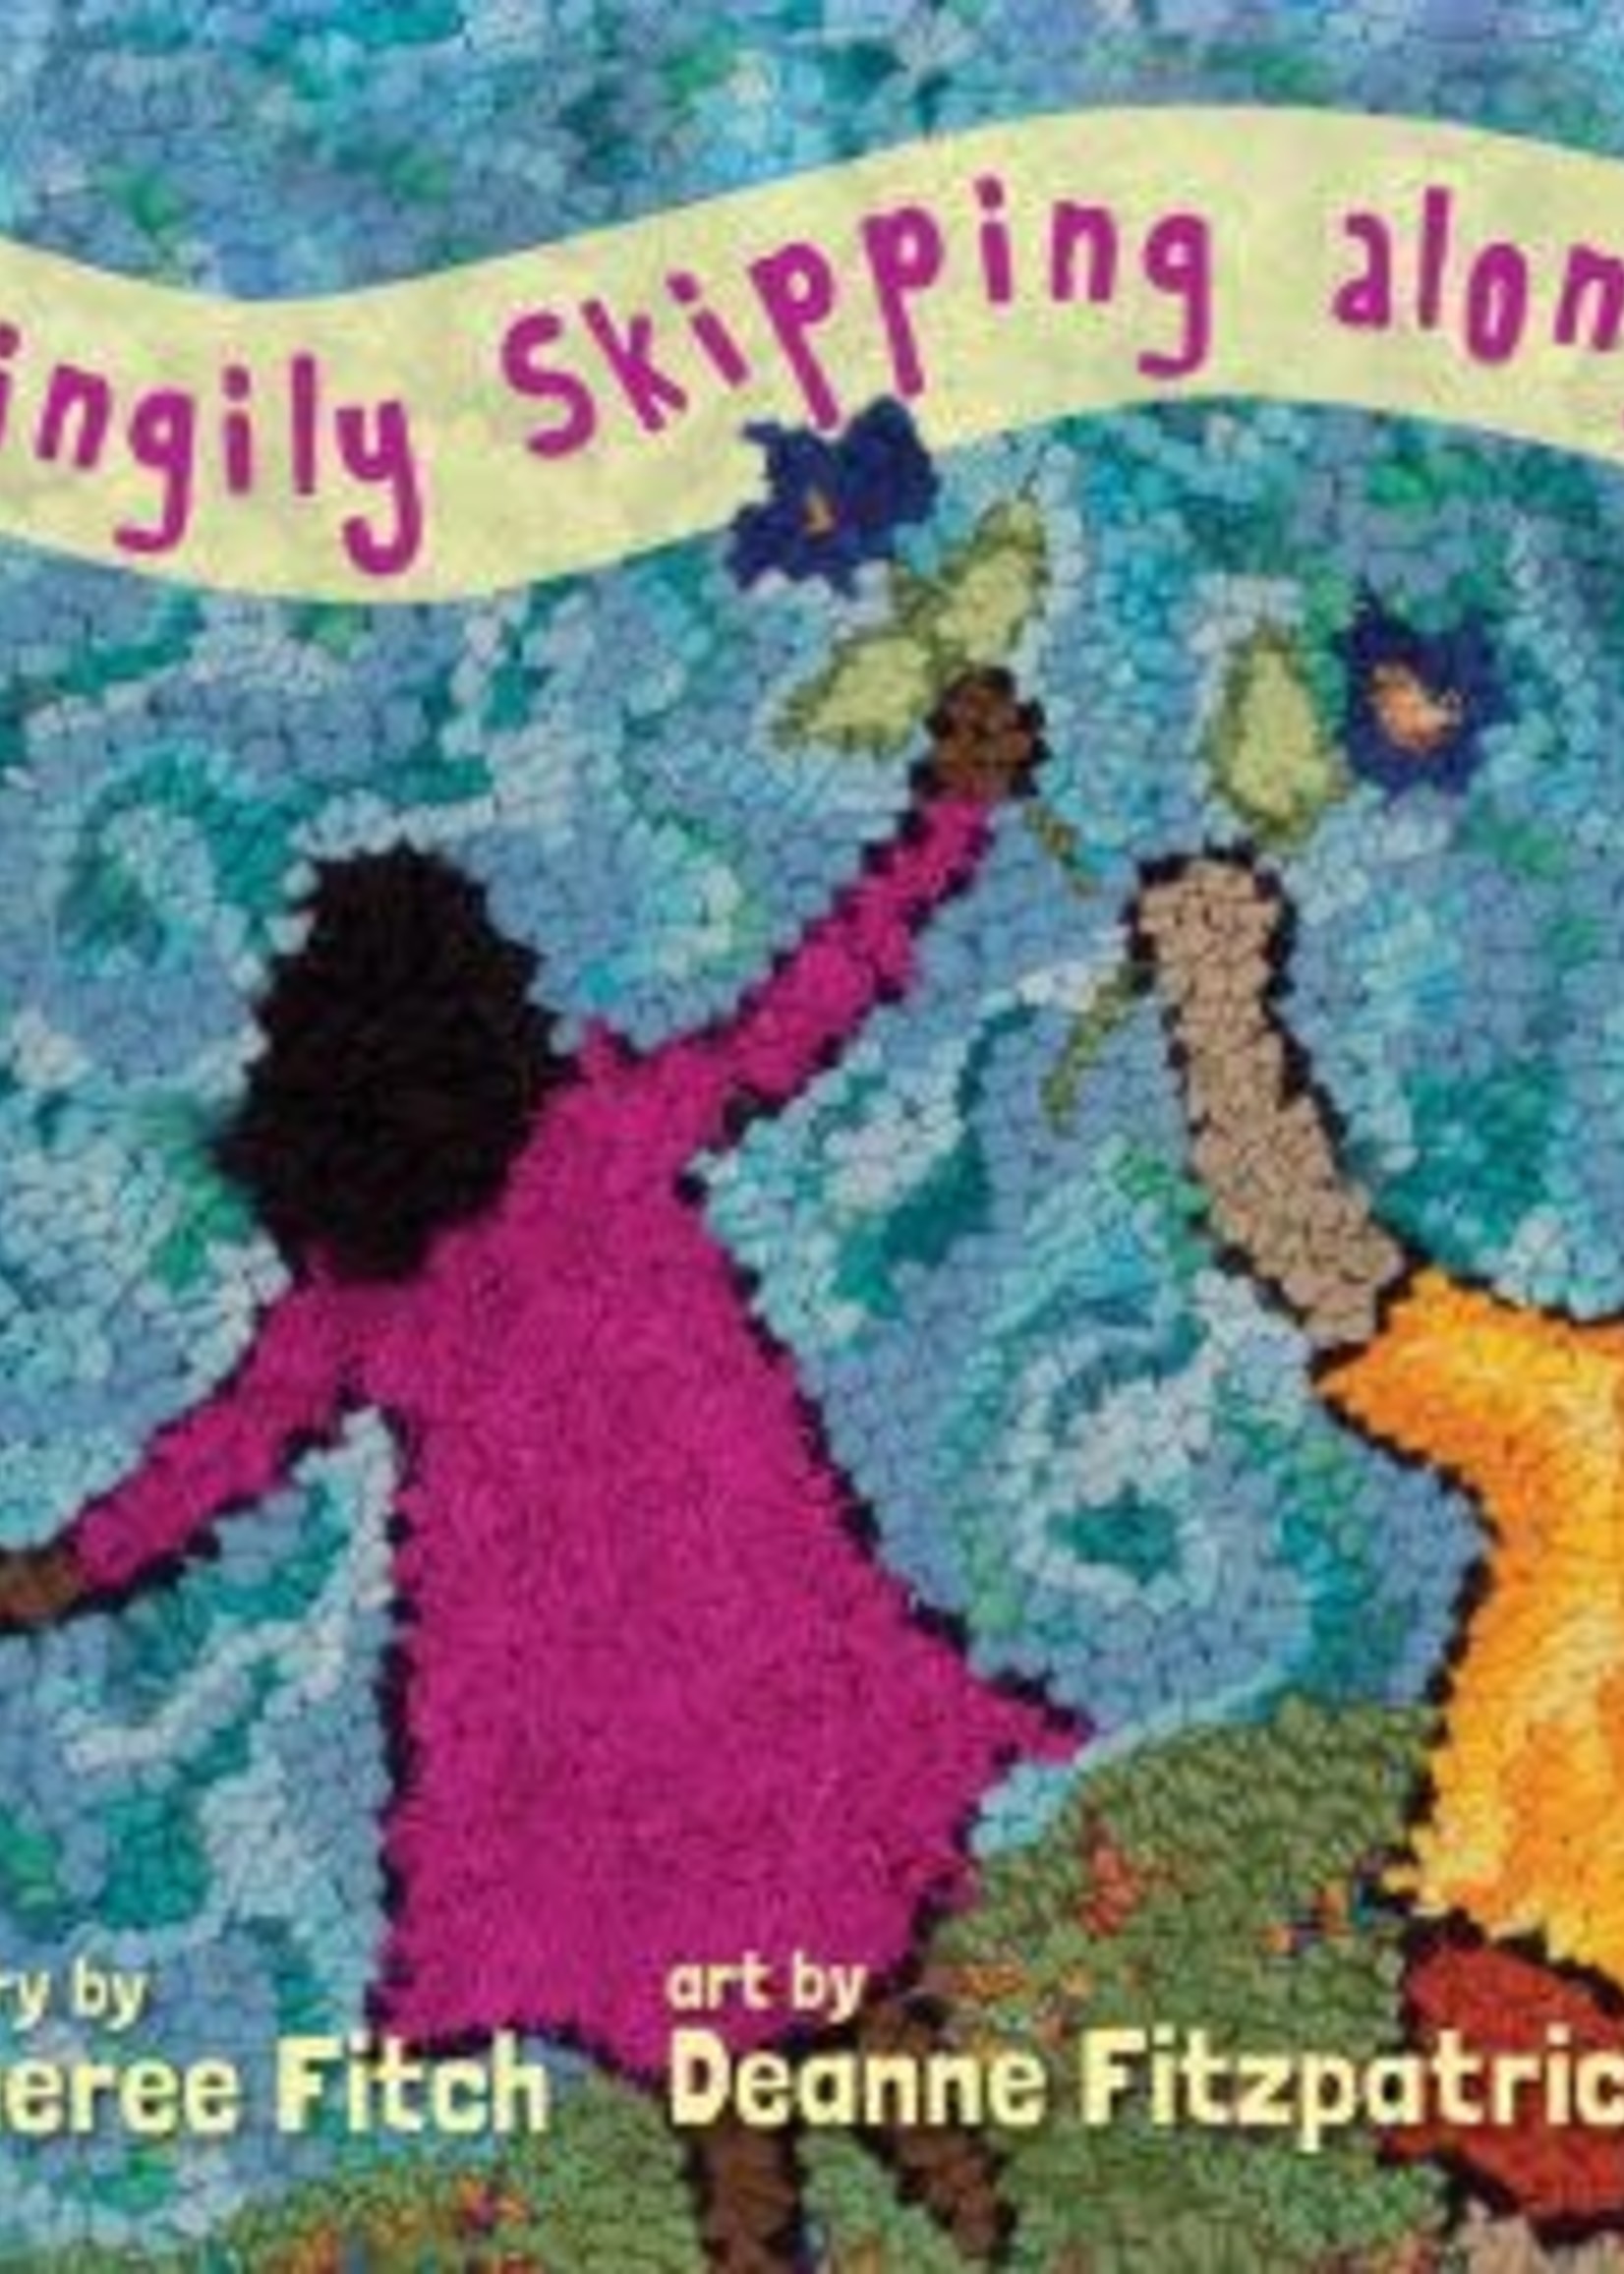 Singily Skipping Along by Sheree Fitch, Deanne Fitzpatrick